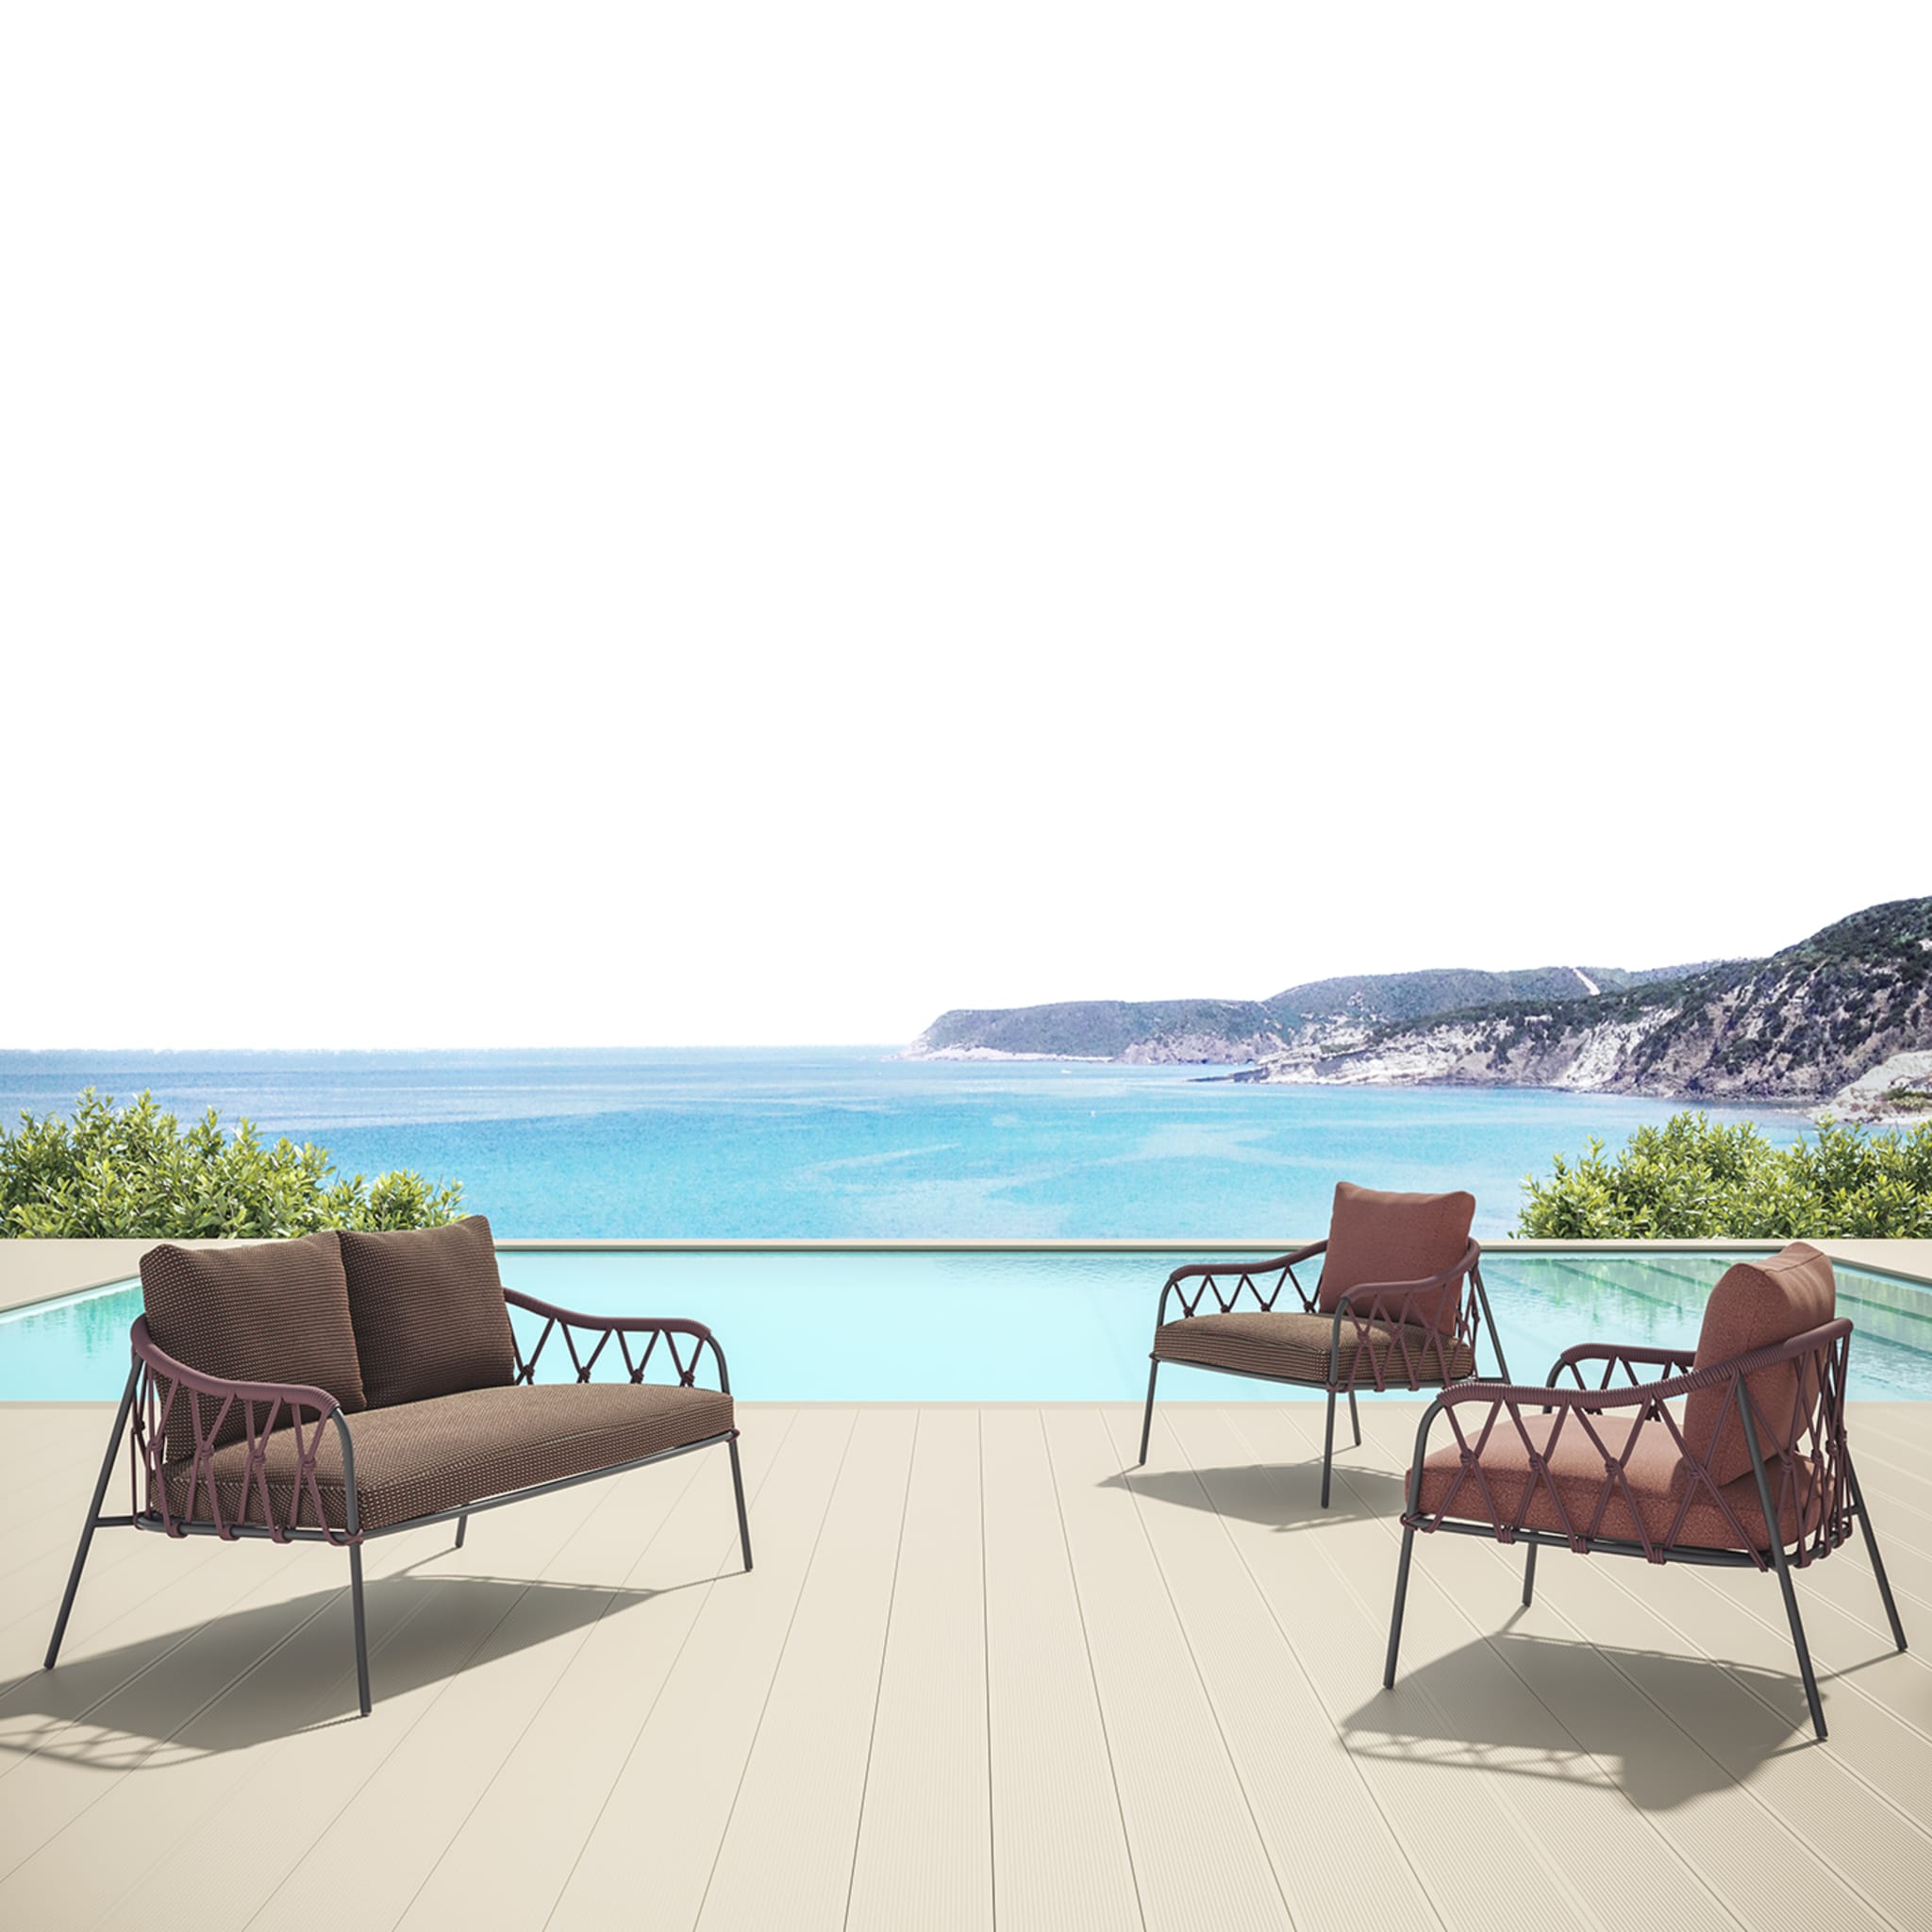 Scala 2-Seater Outdoor Sofa by Marco Piva - Alternative view 1